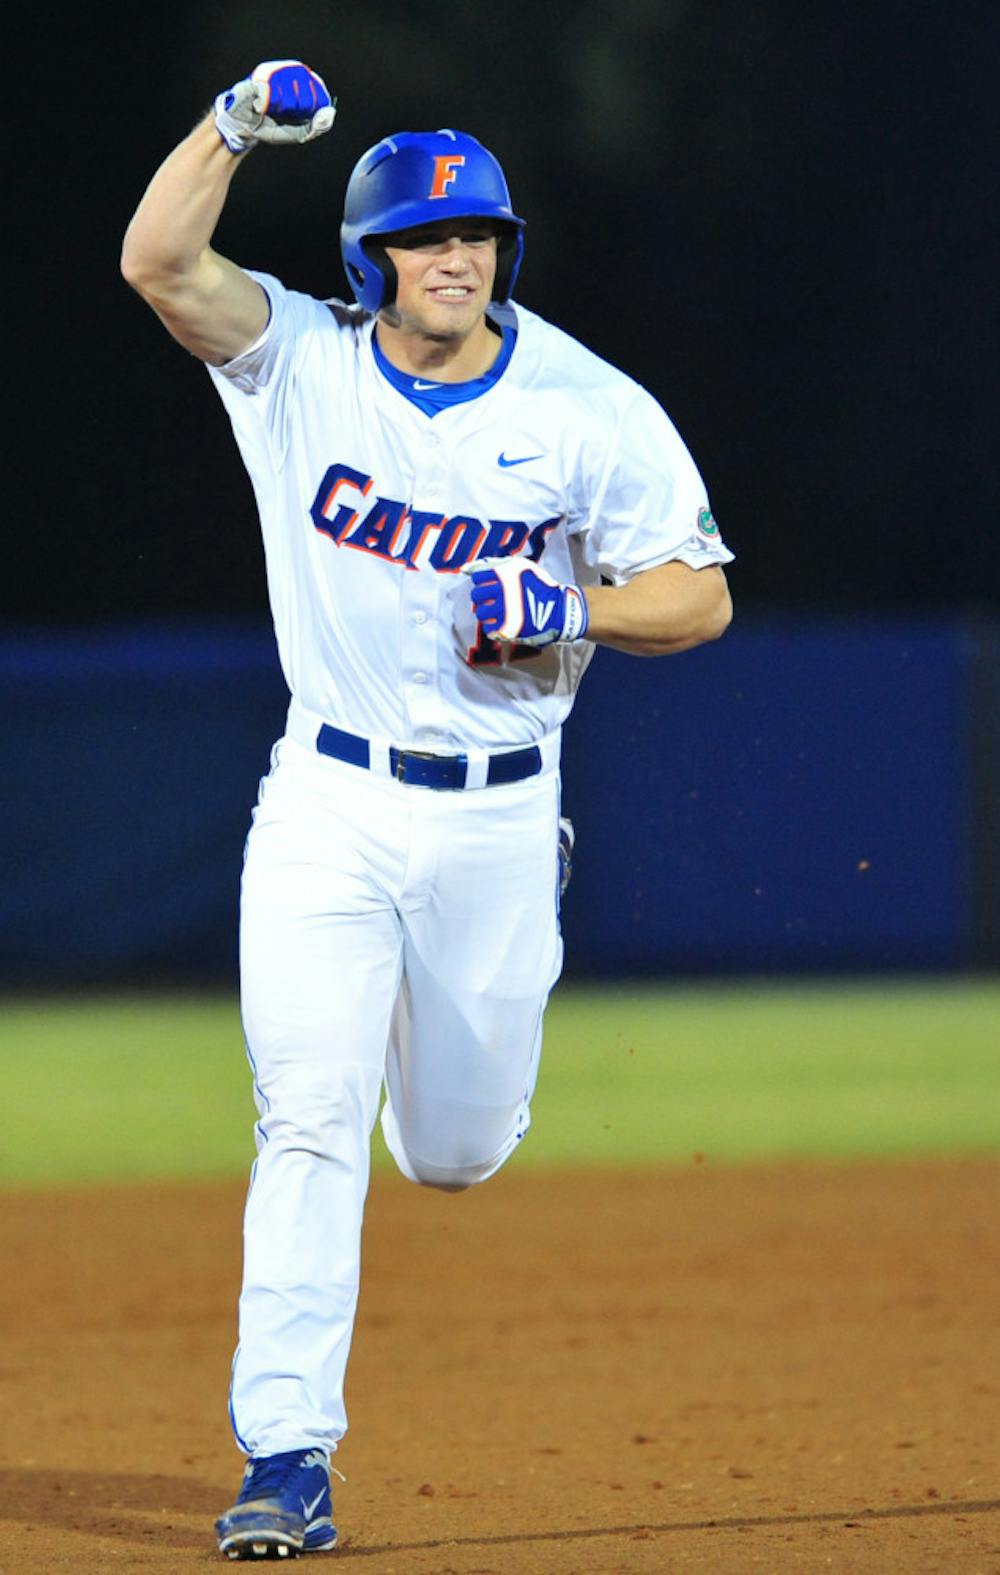 <p>Freshman Taylor Gushue rounds the bases after belting an
opposite-field home run on the first pitch of his first college
at-bat during Florida's 7-3 win against Cal State Fullerton on
Friday. </p>